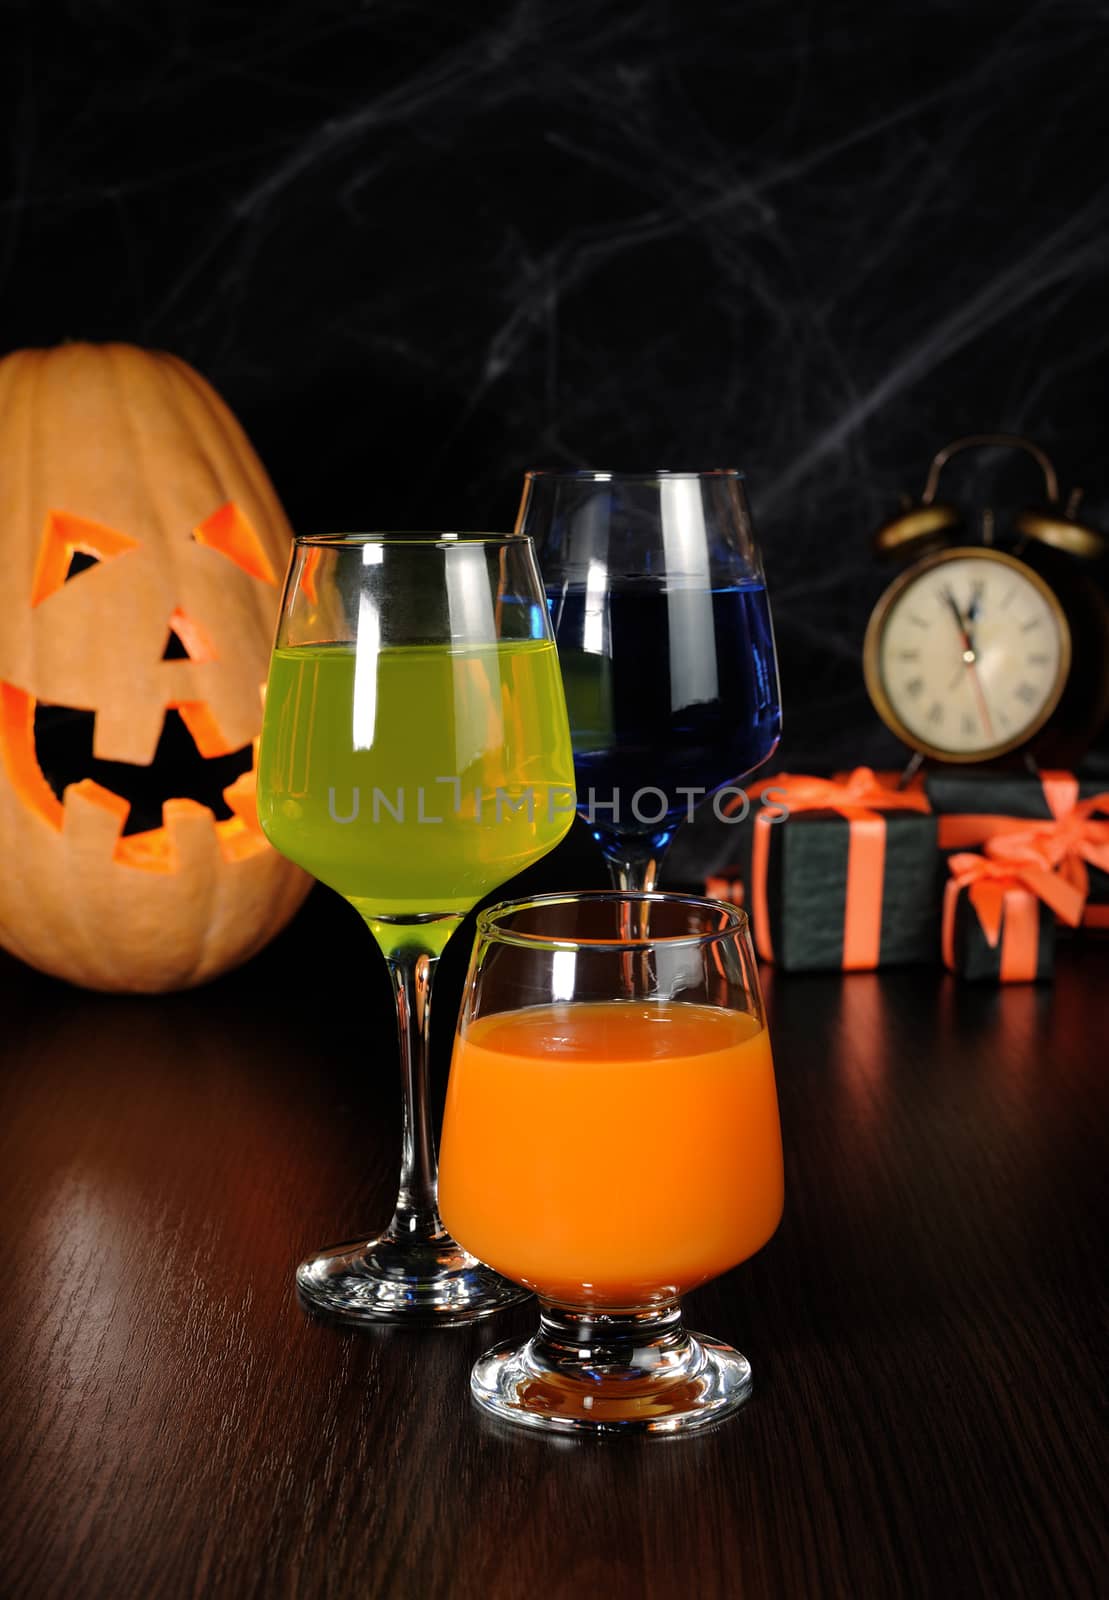 A variety of juices and drinks on the table in honor of Halloween